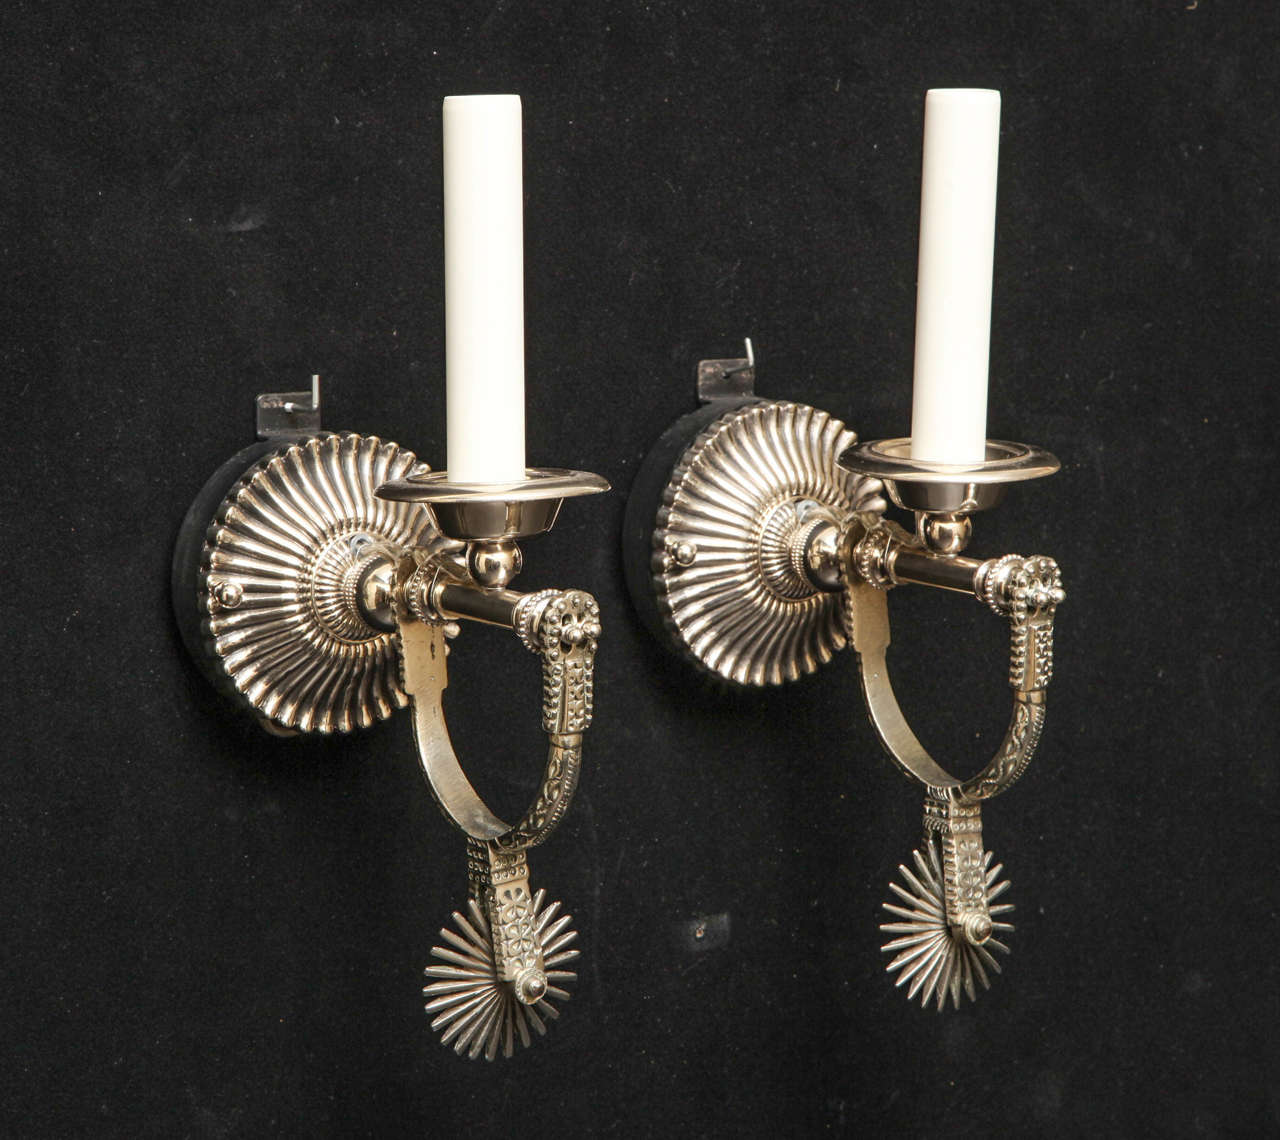 Pair of One Light Silver, Iron And Bronze One Light Sconces With Gadrooned Back plates With Articulating Spurs